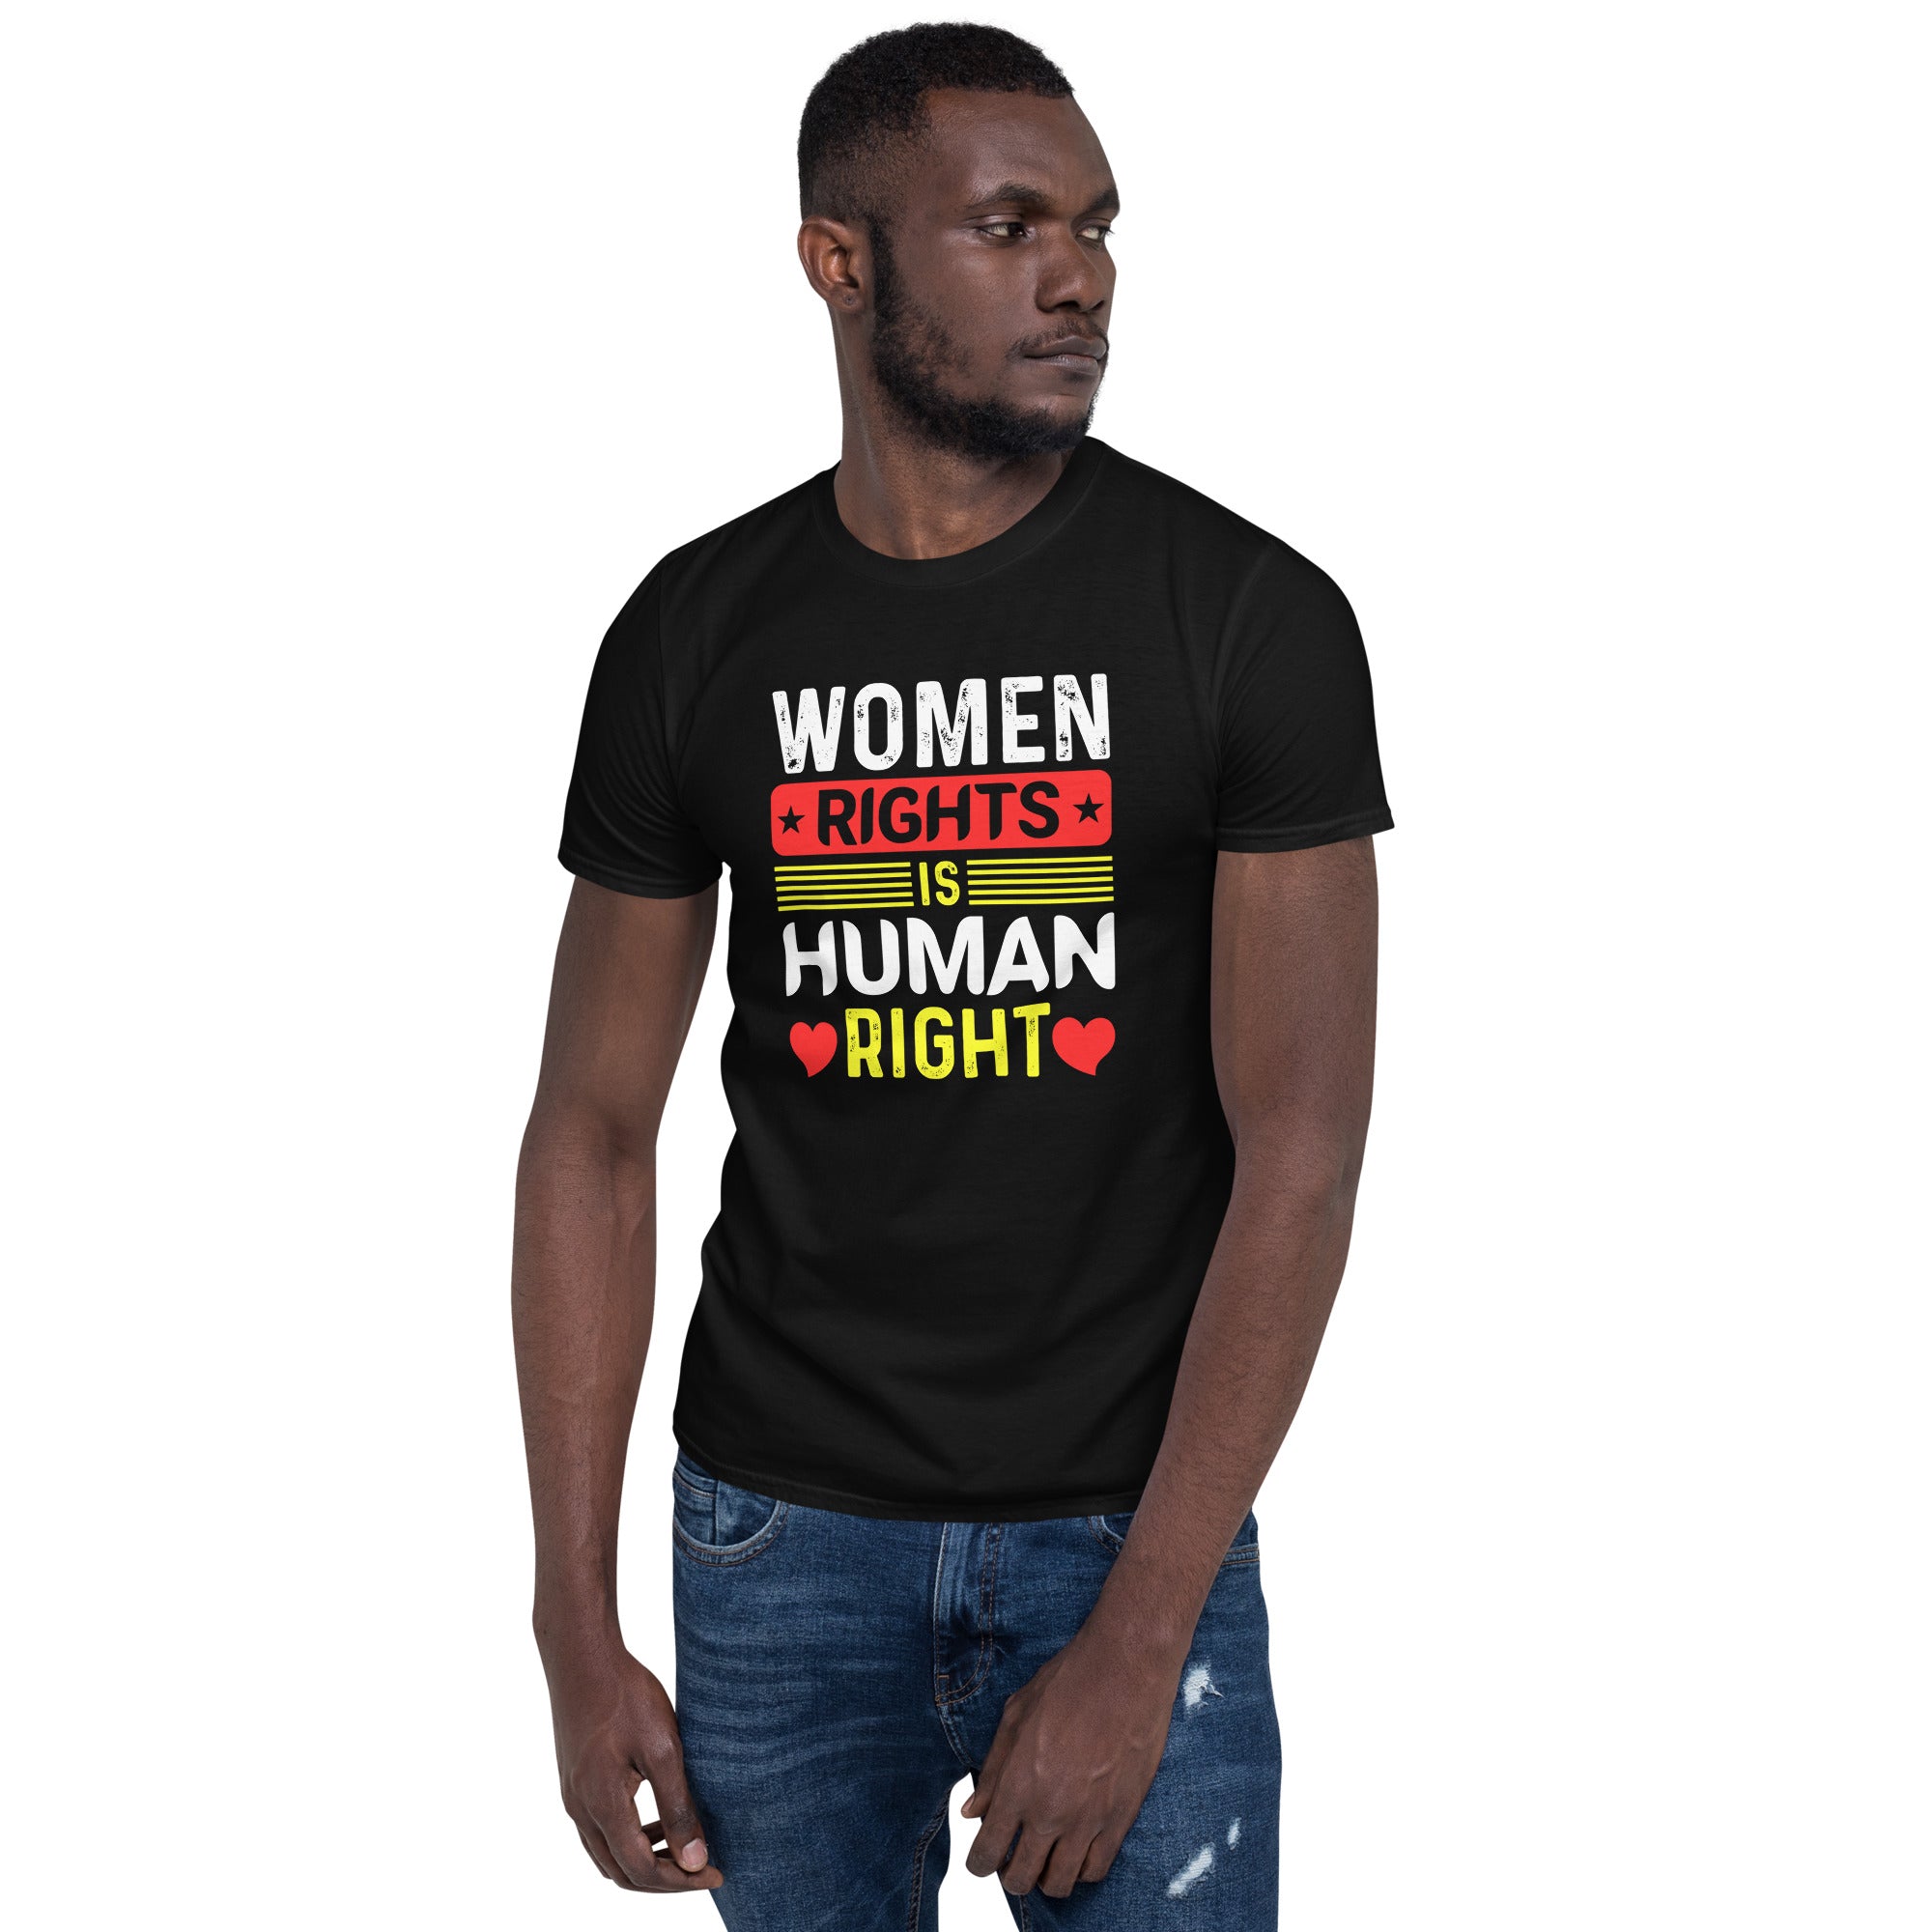 Women Rights Is Human Right - Short-Sleeve Unisex T-Shirt